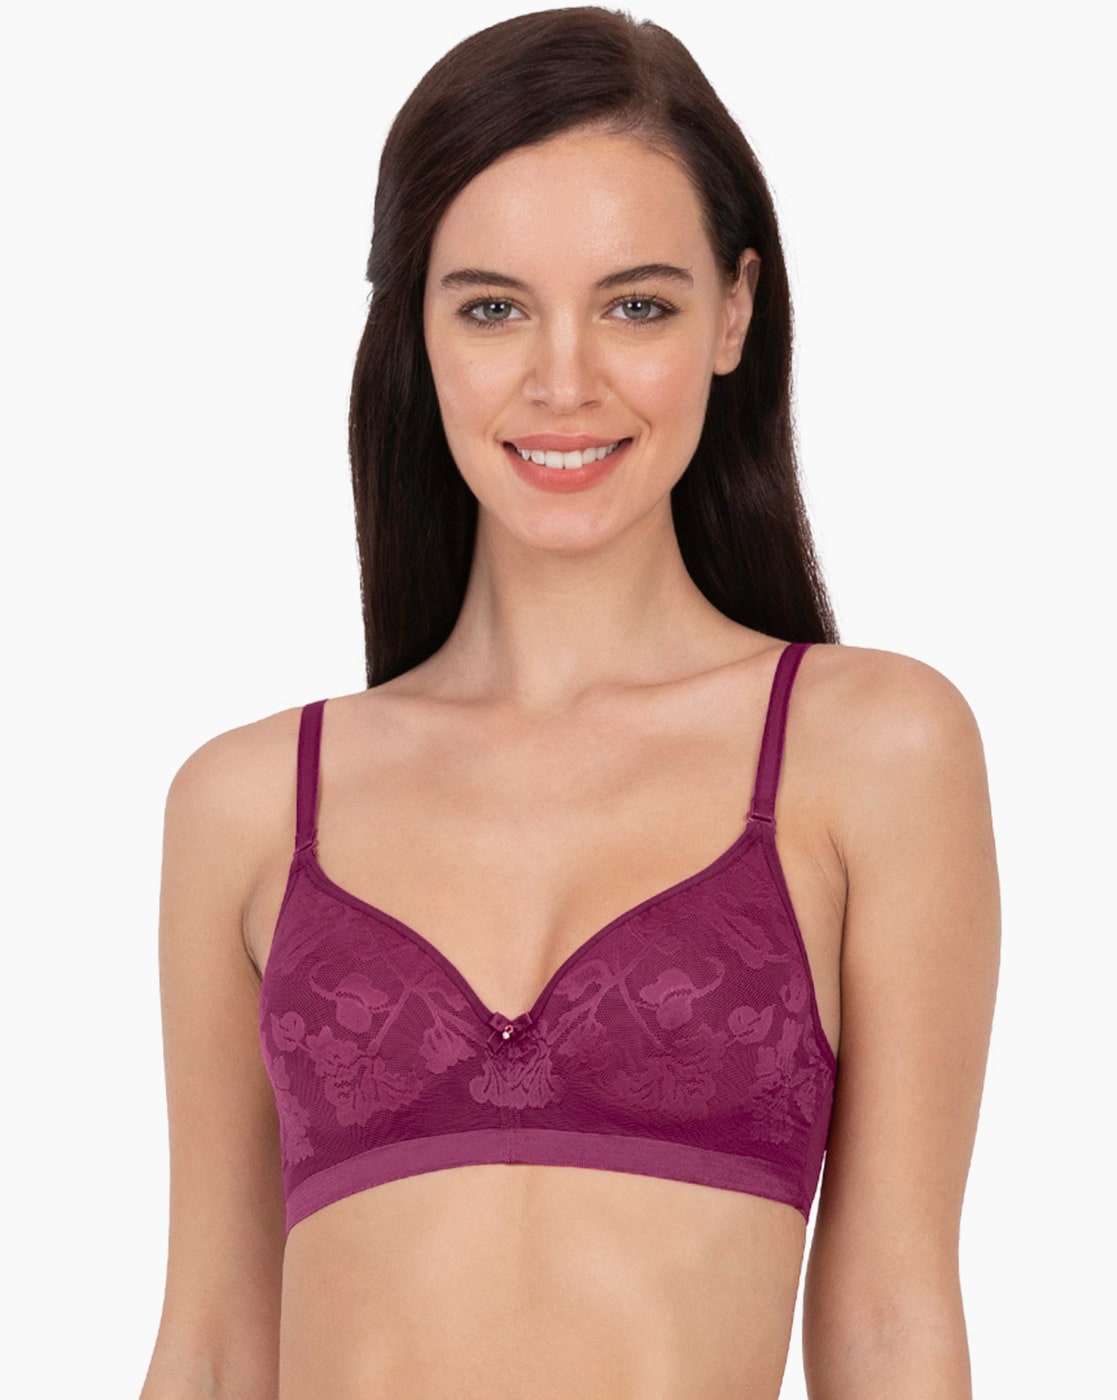 Lightly-Padded Wired Full Coverage Seamless Floral Lace Bra - BRA10301